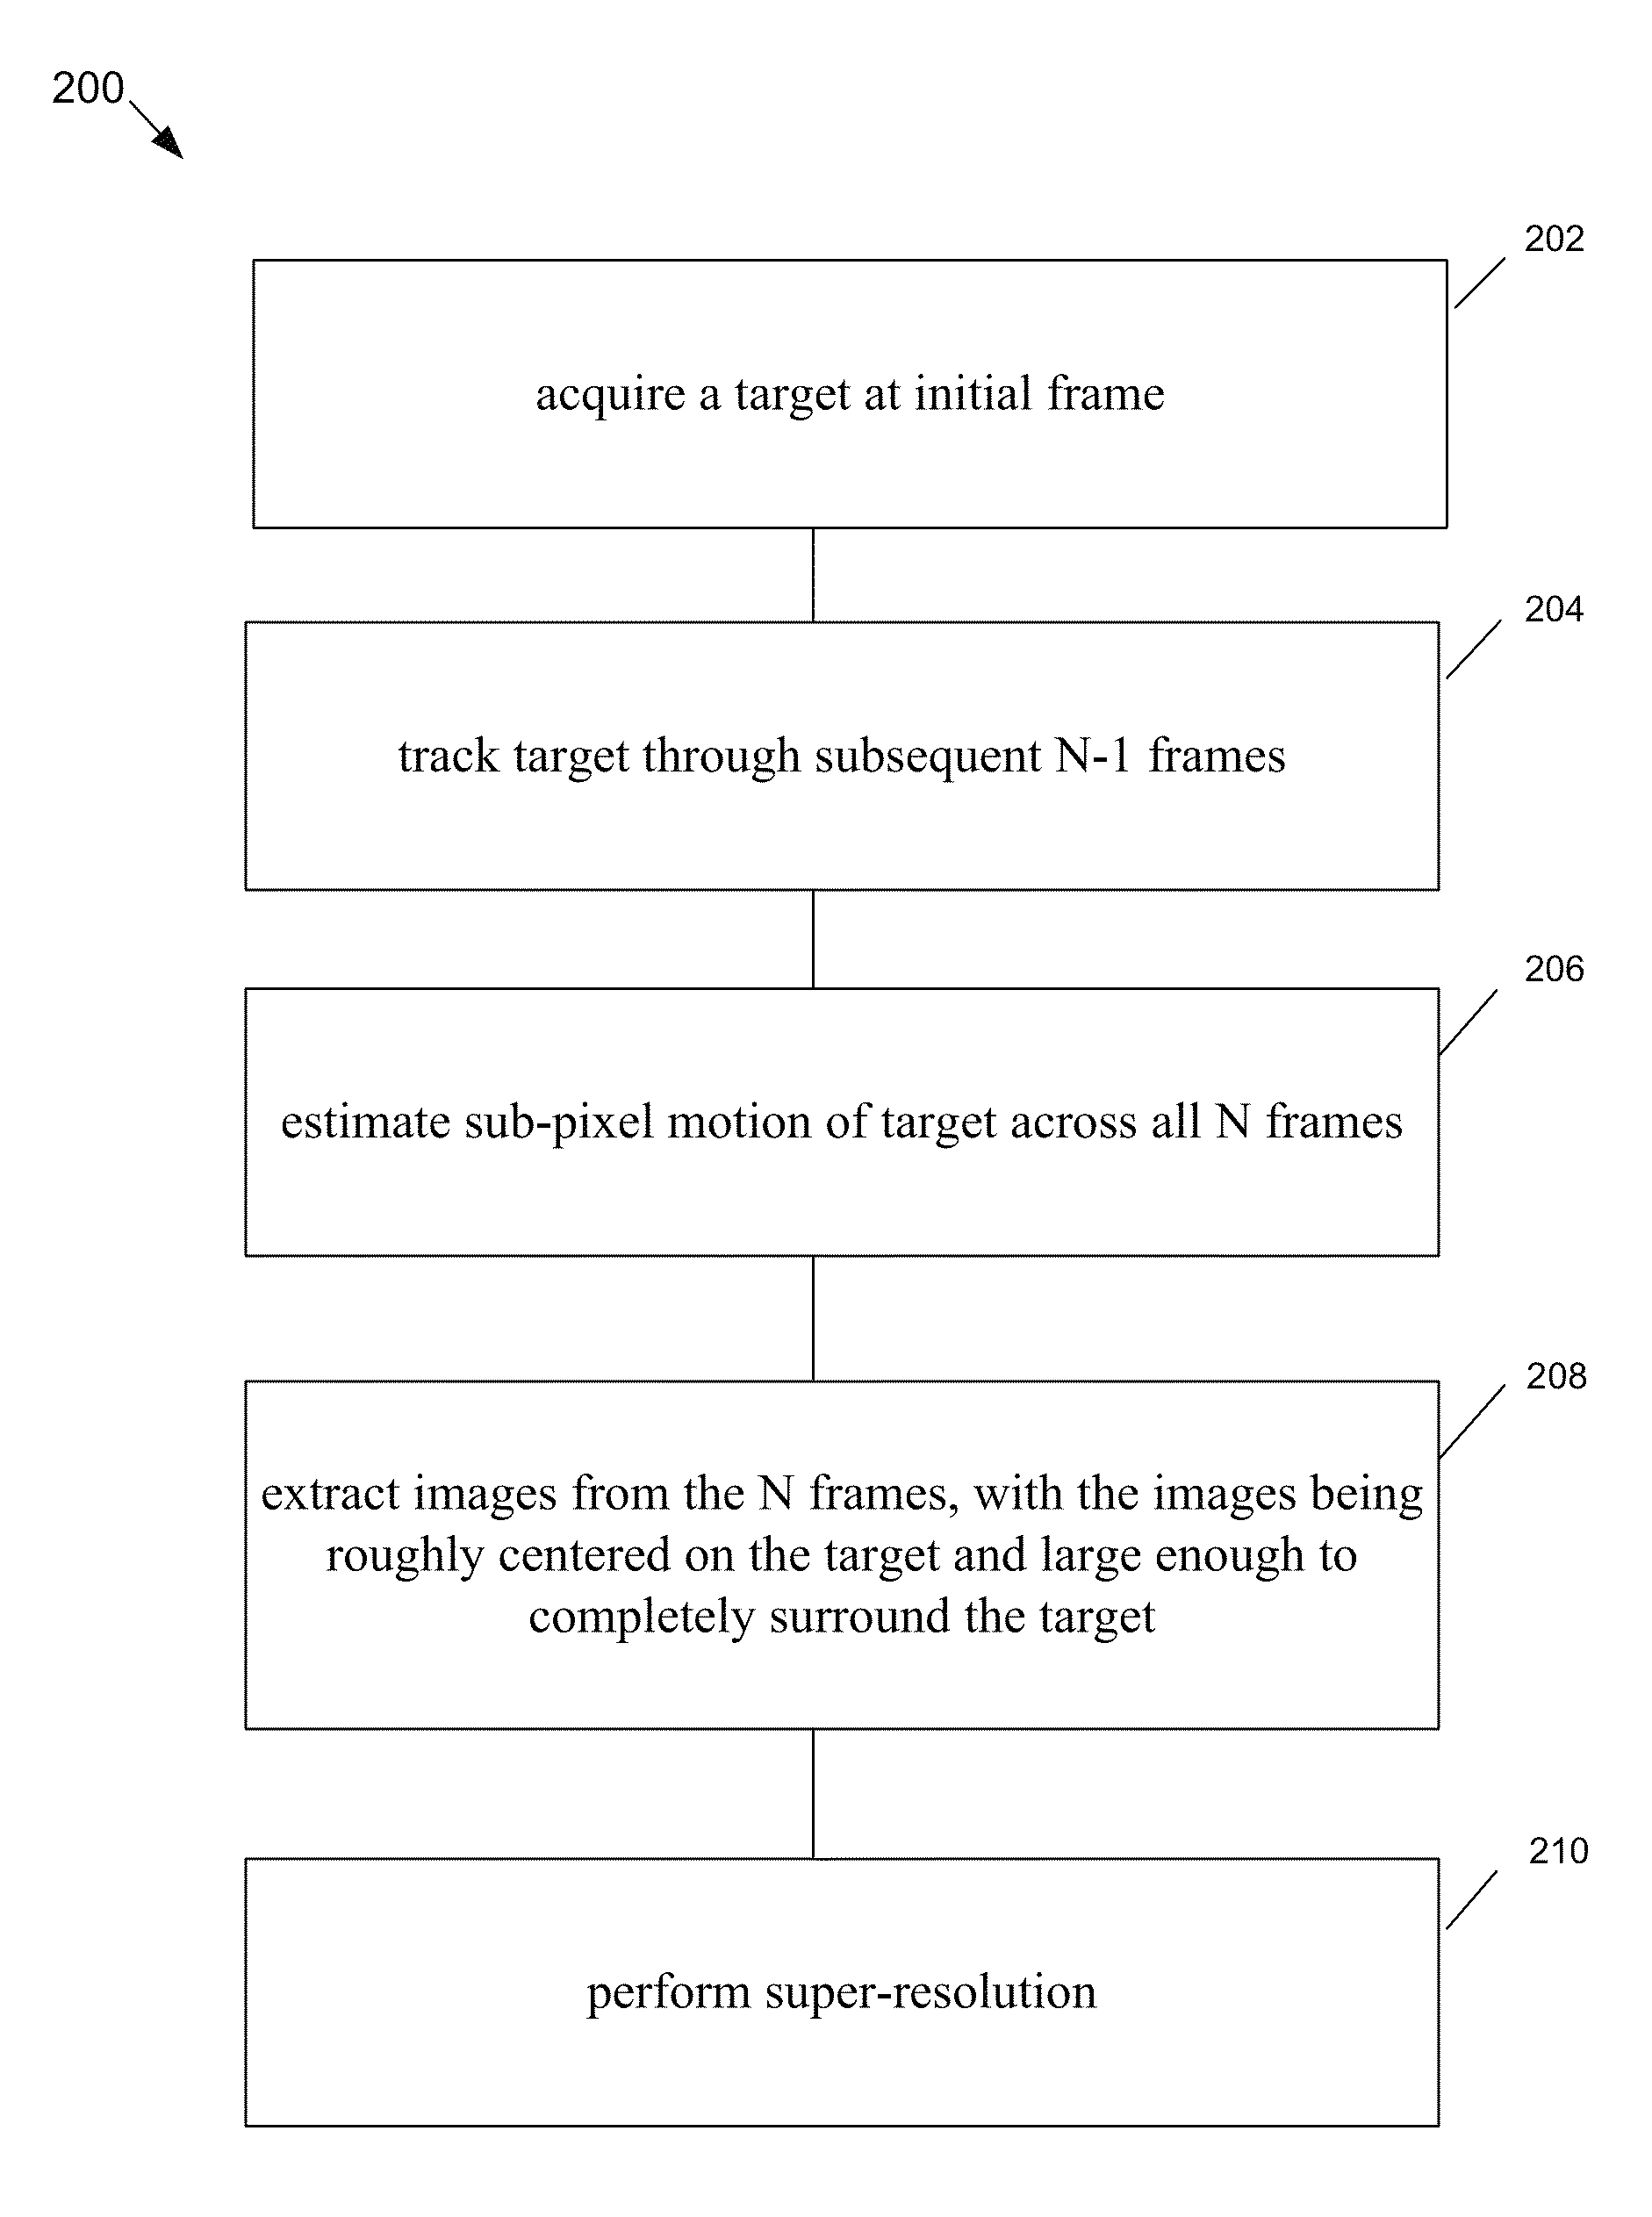 Moving object super-resolution systems and methods